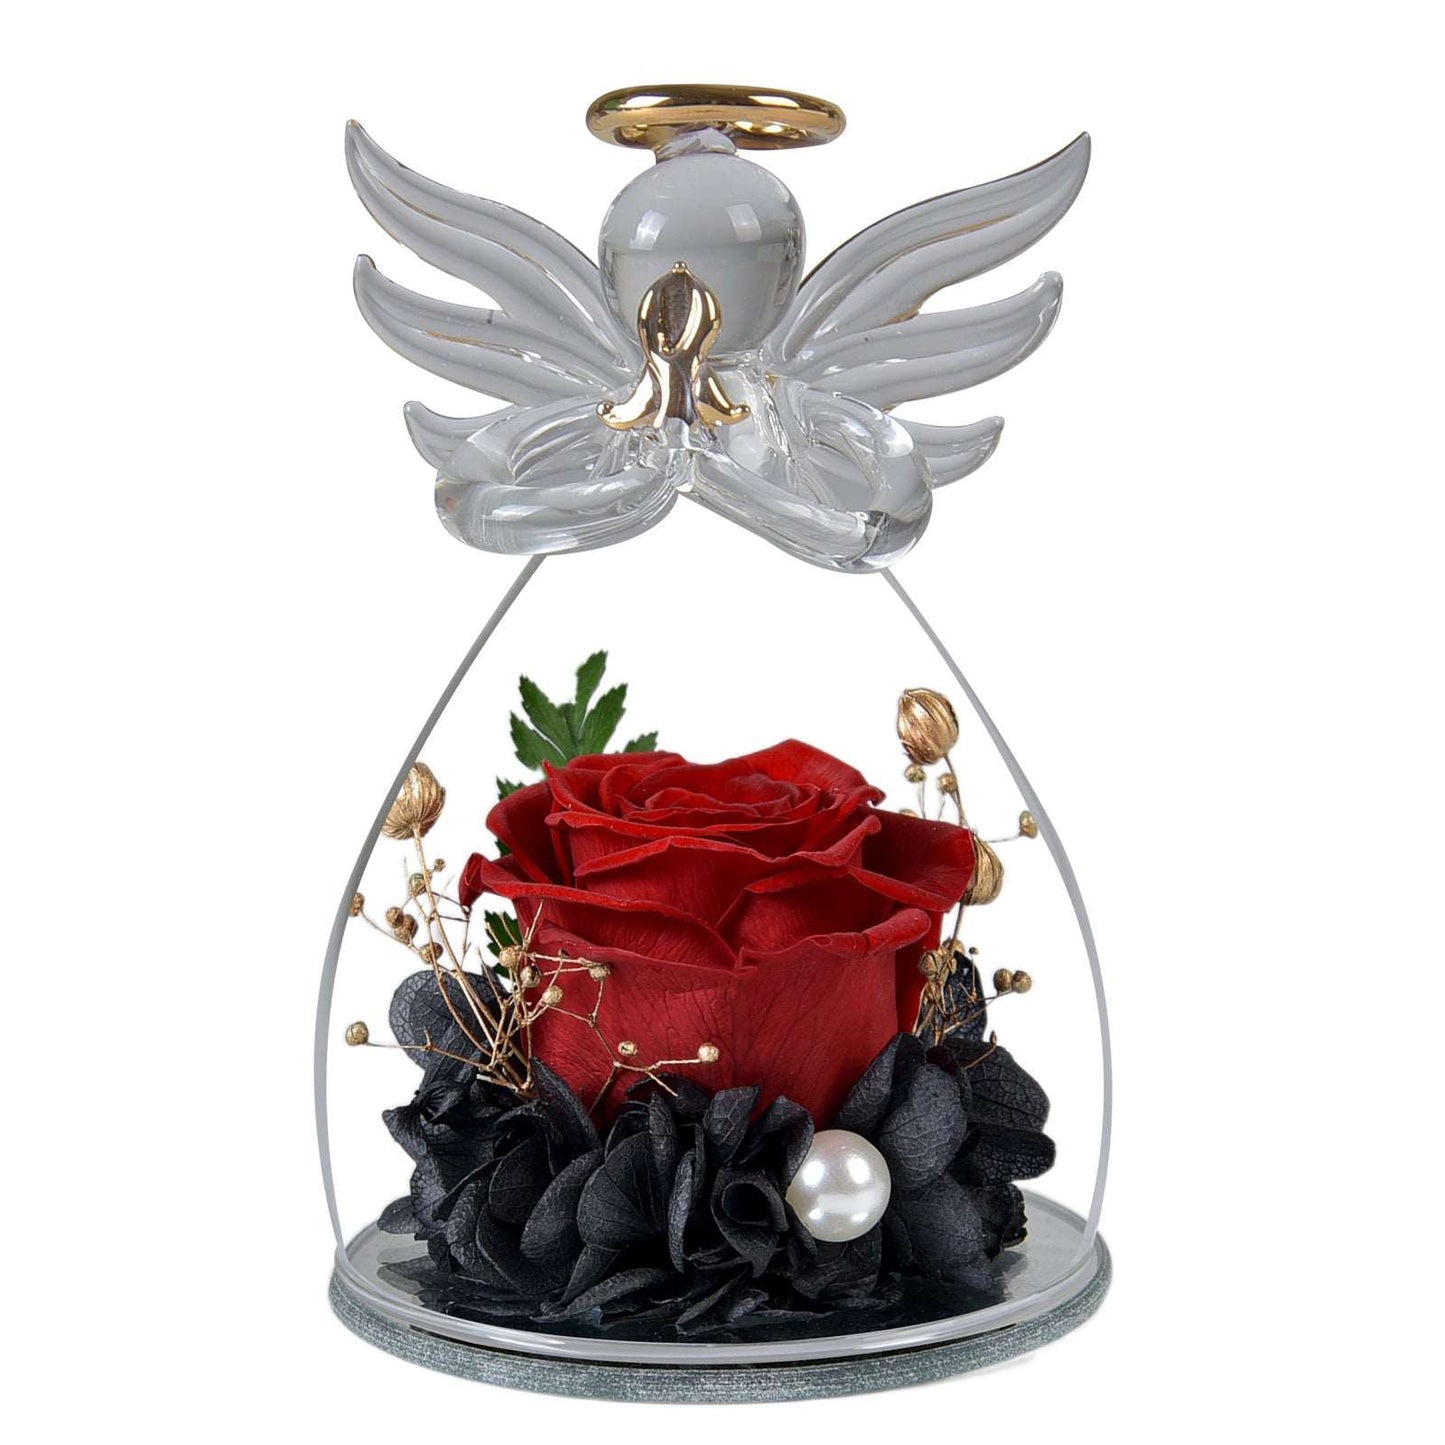 "Eternal Flower Rose Glass Cover - Perfect Christmas, Valentine's Day Decoration - Angel-Inspired Design - Bestselling Item on Amazon"